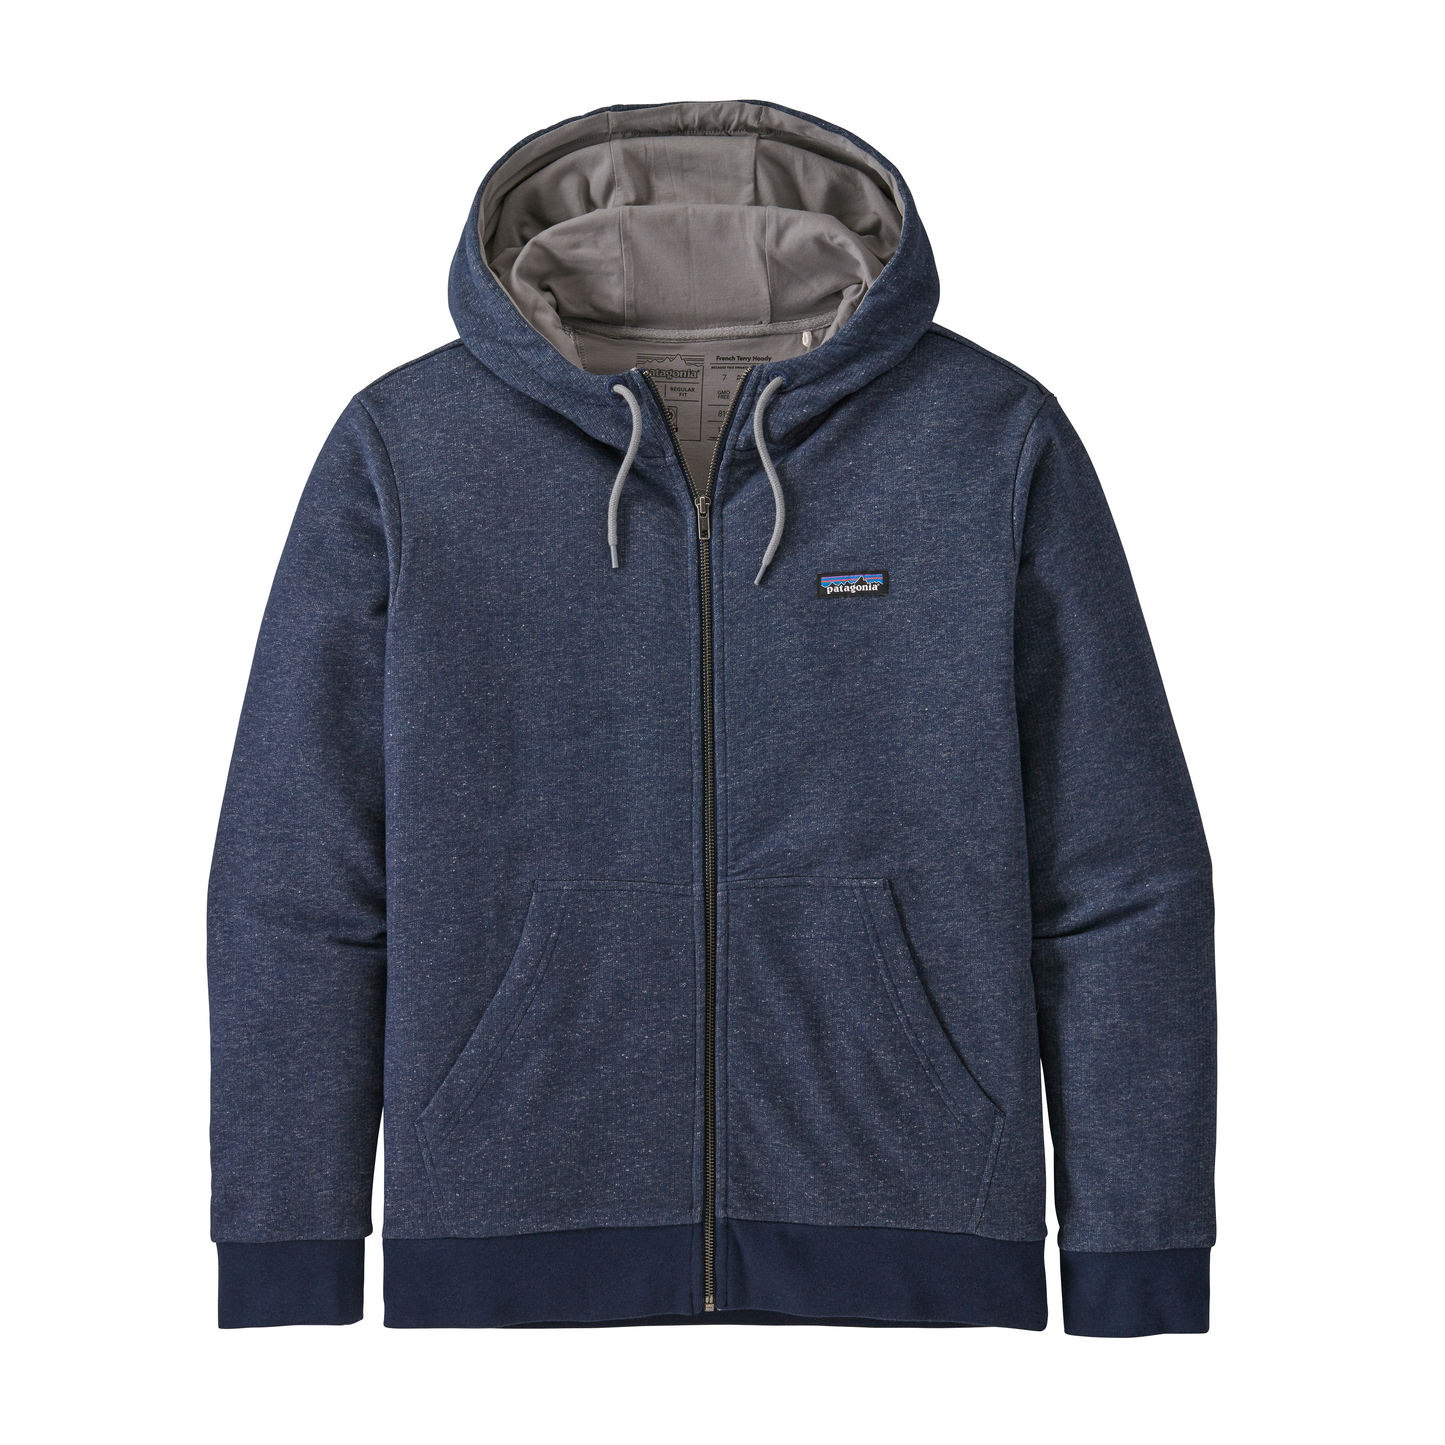 Patagonia Label French Terry FZ Hoody